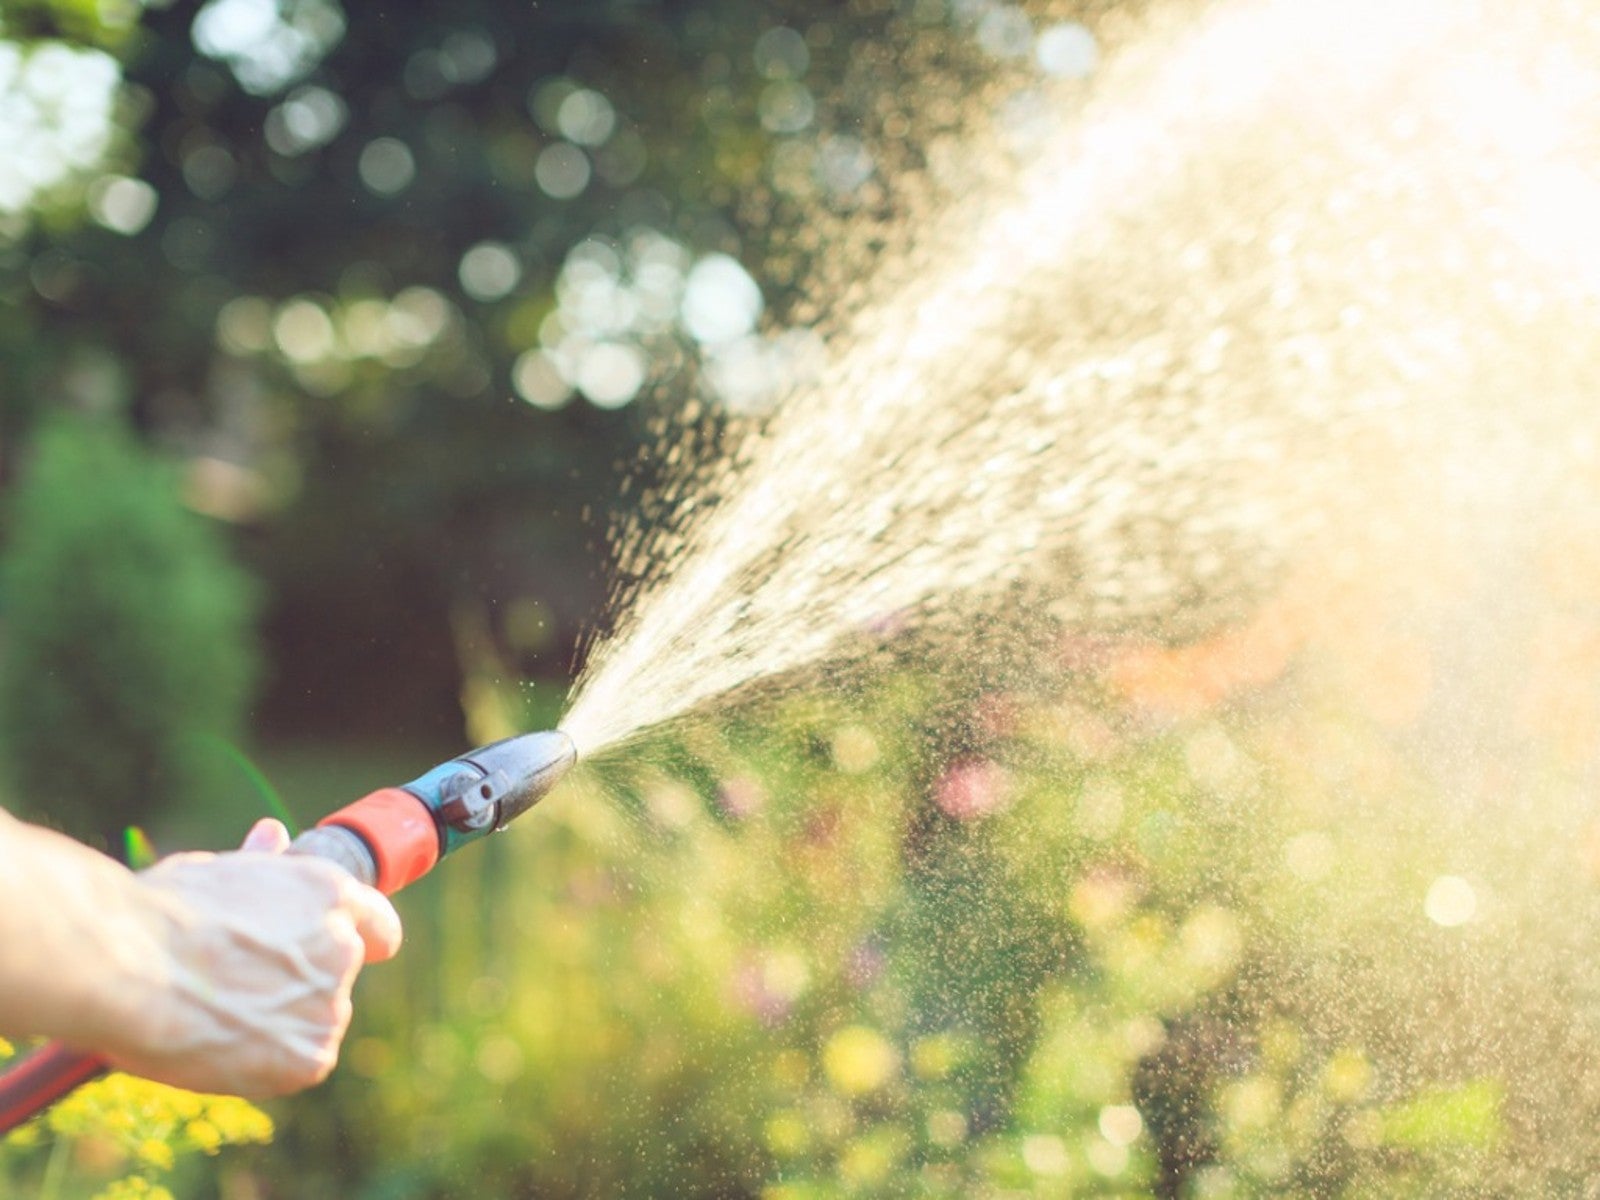 Gardener watering with a hose